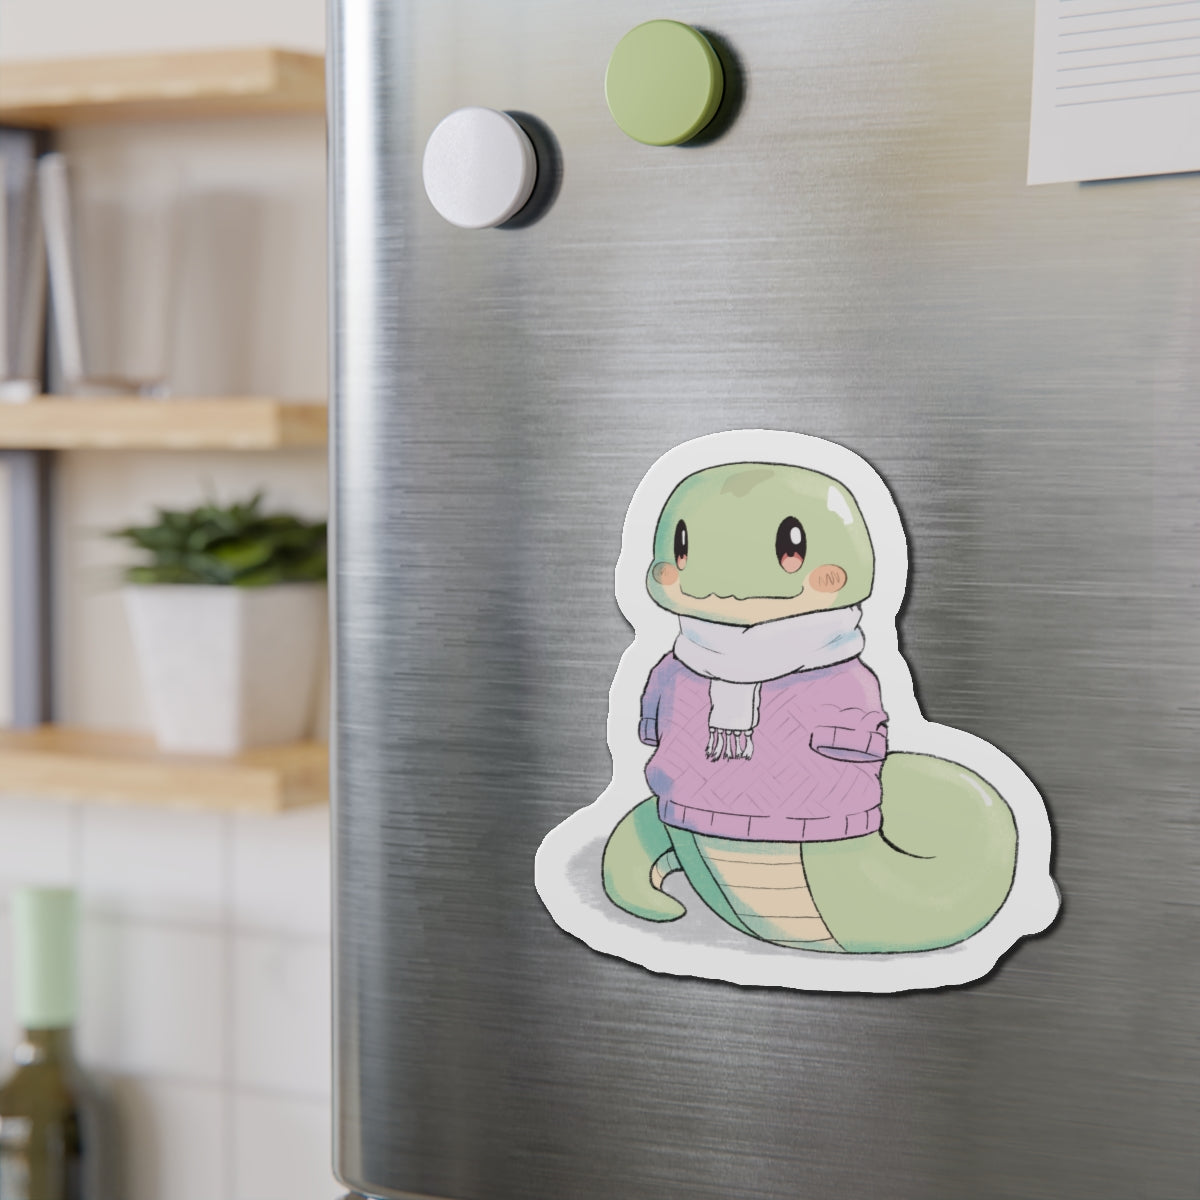 Snuggle Snake Die-Cut Magnet for Refrigerators, Cars and More